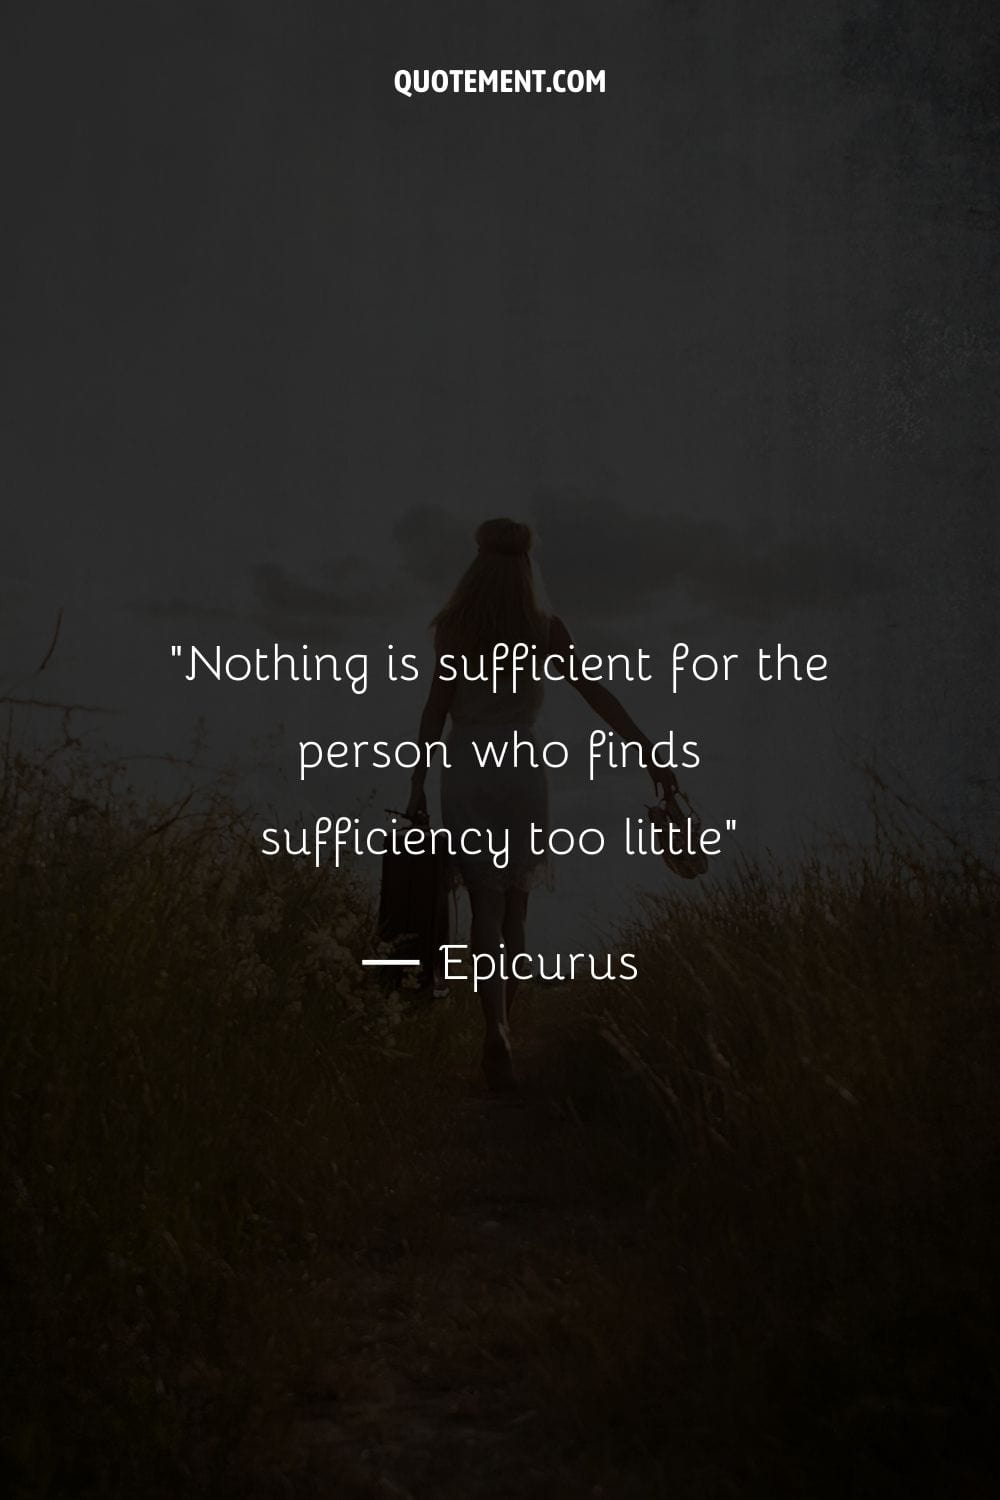 Nothing is sufficient for the person who finds sufficiency too little